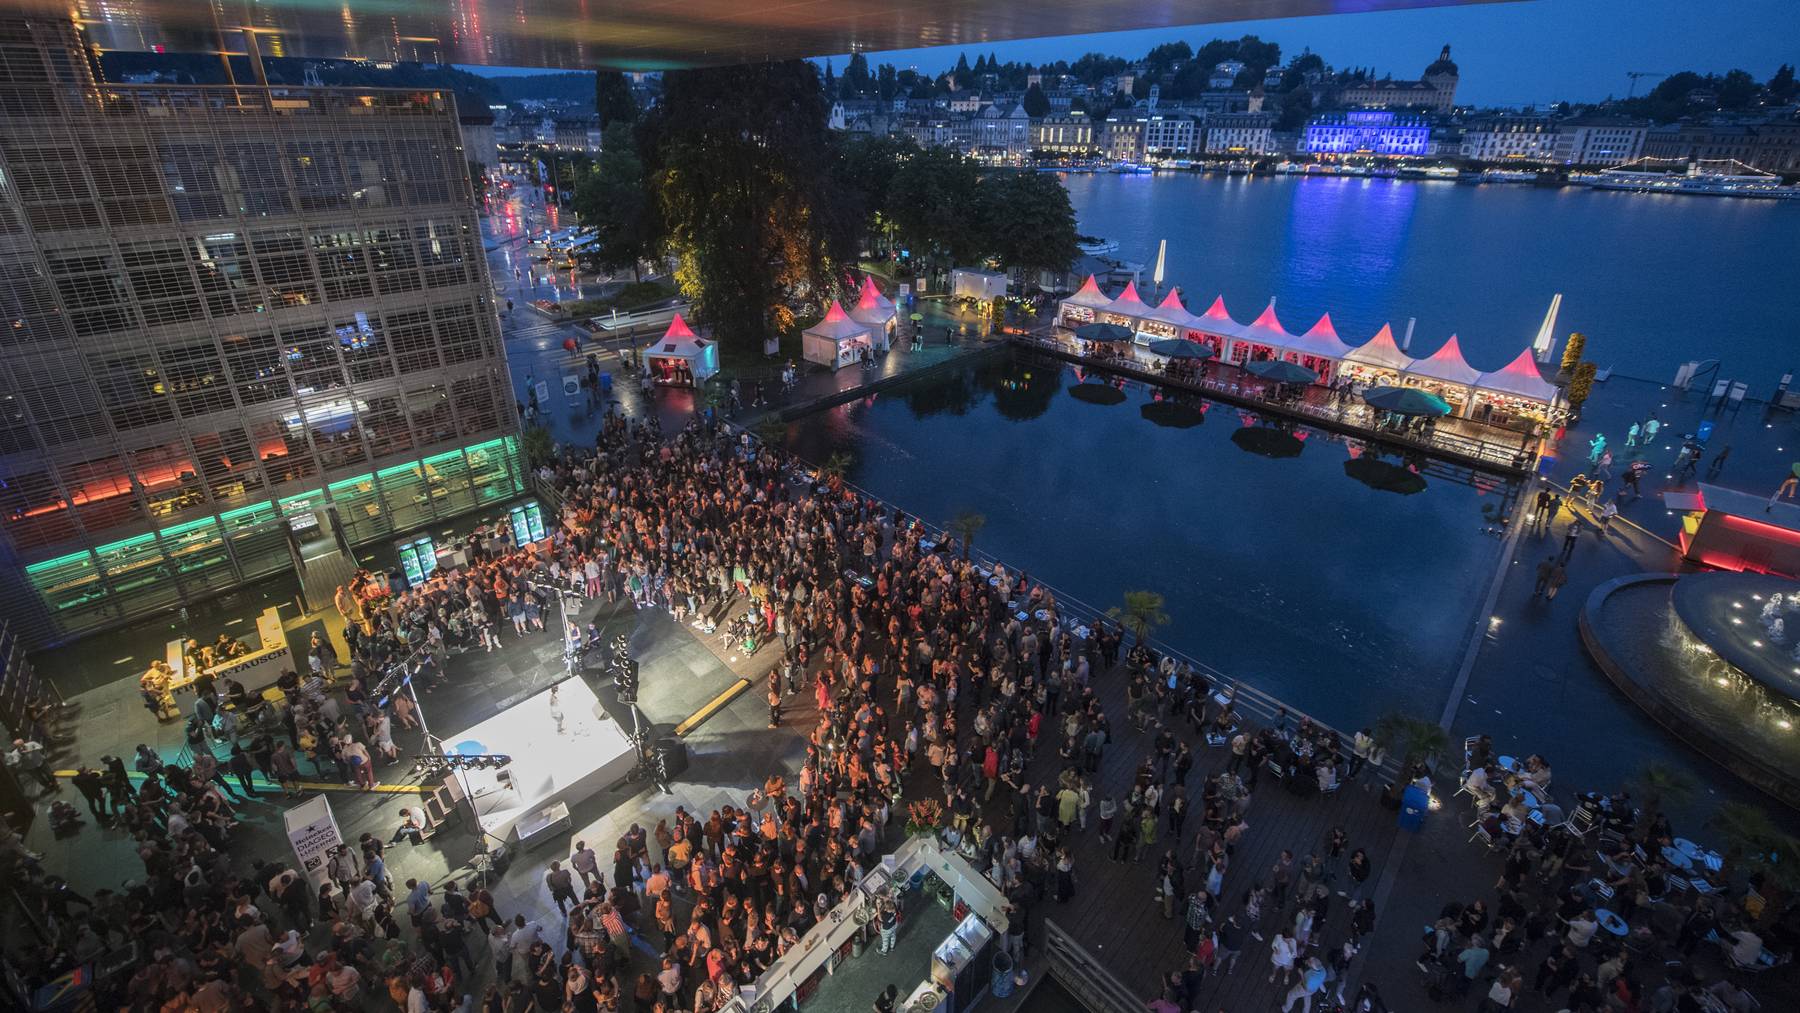 The Festival Plaza at the KKL on the Blue Balls Festival in Lucerne, Switzerland, Friday July 20, 2018. The music event runs from 20 to 20 July. // Blue Balls Festival Luzern